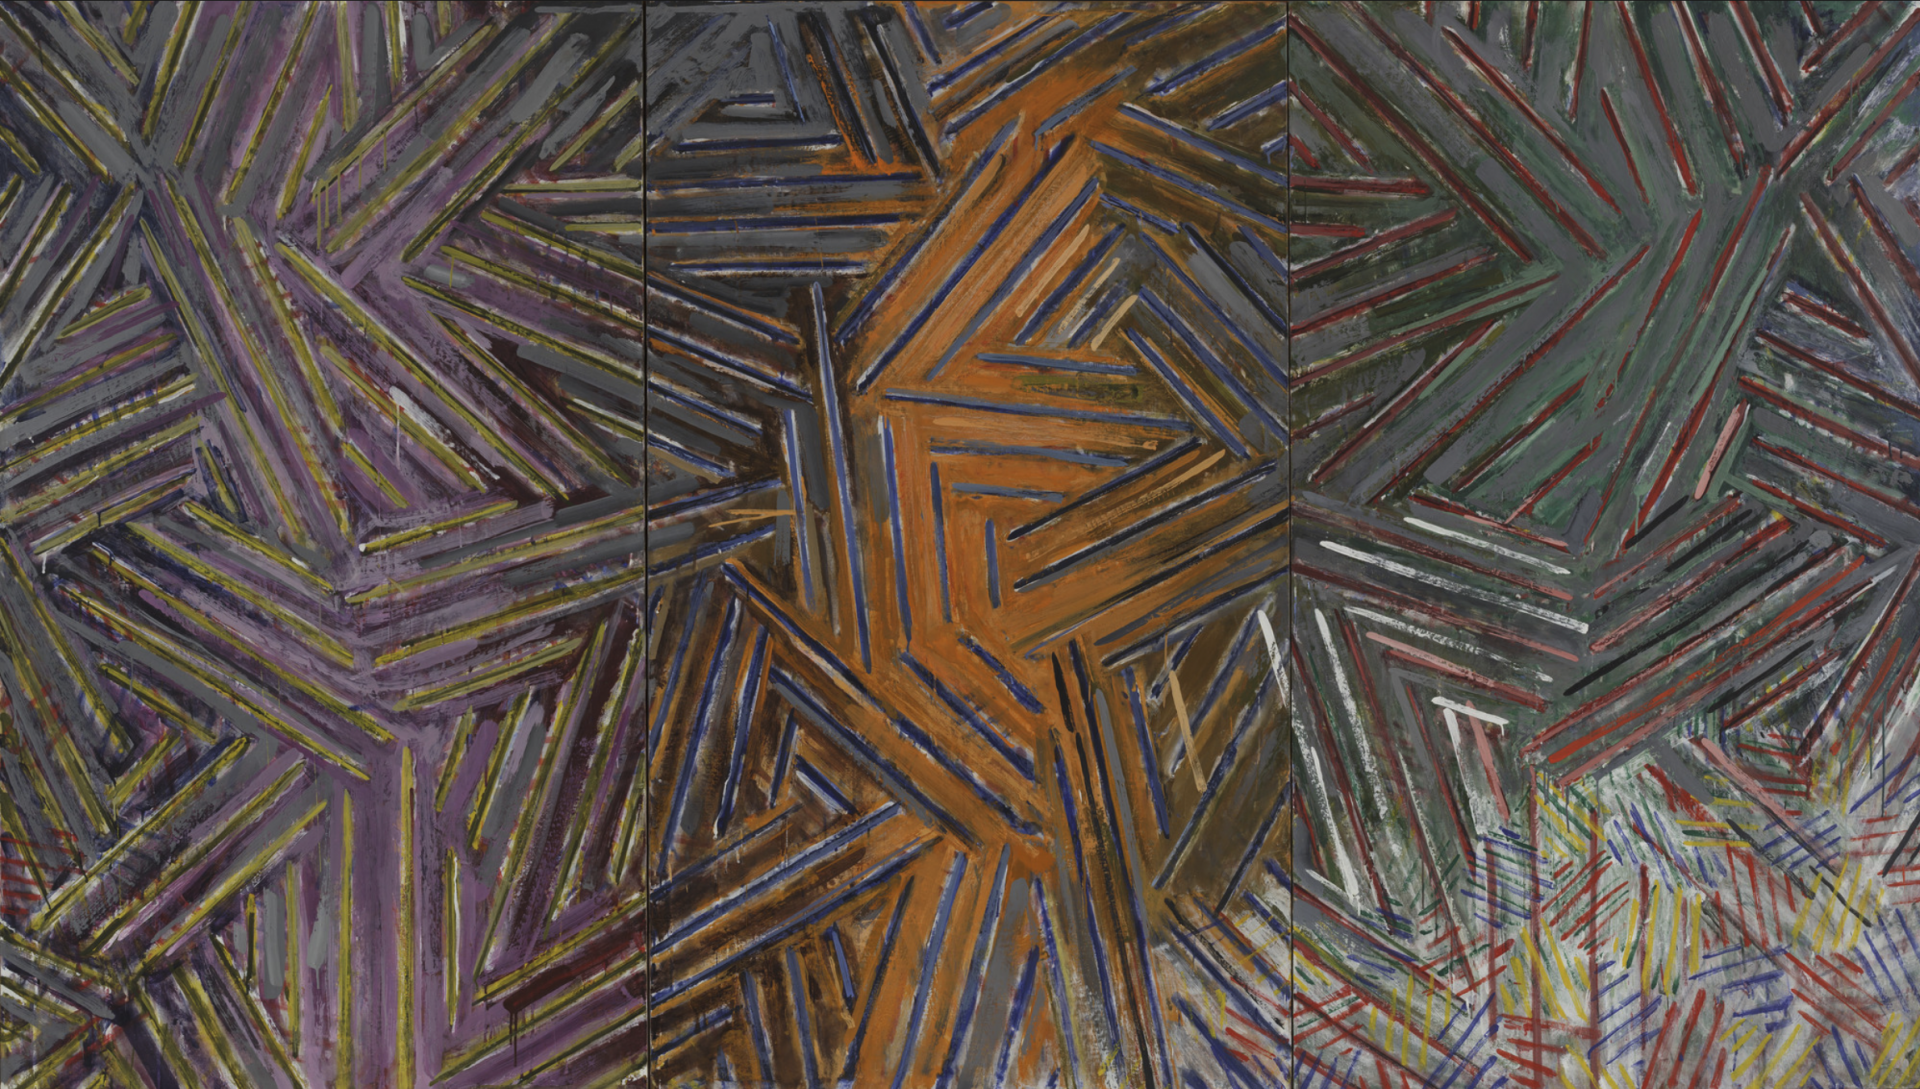 "Between the Clock and the Bed" by Jasper Johns, 1981, a triptych with cross-hatched patterns in varying colors, reflecting Johns' interest in literalness, repetitiveness, and the interplay of order and meaninglessness.